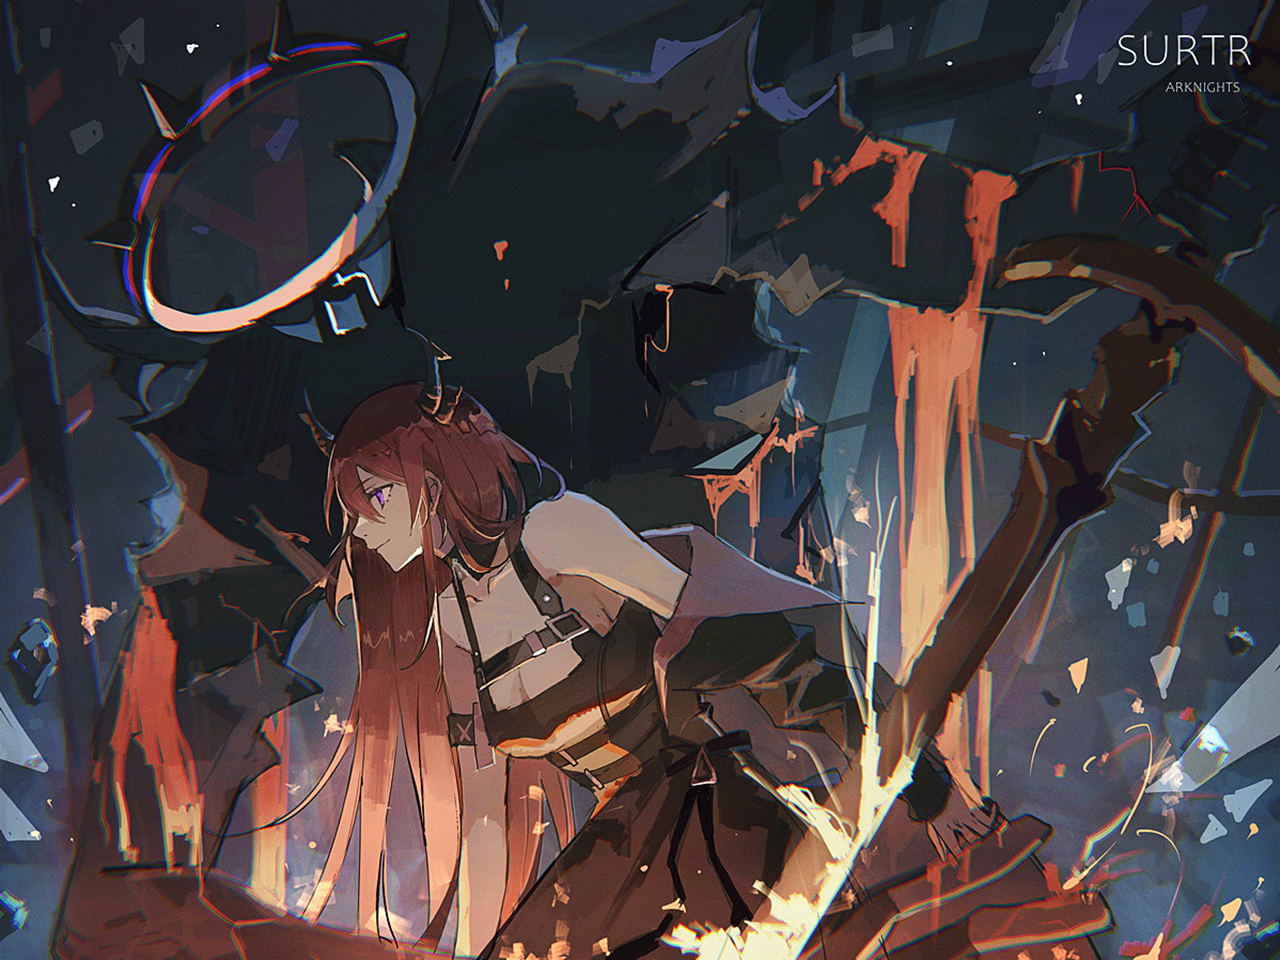 Anime 1280x960 Lococo anime anime girls Arknights Surtr (Arknights)